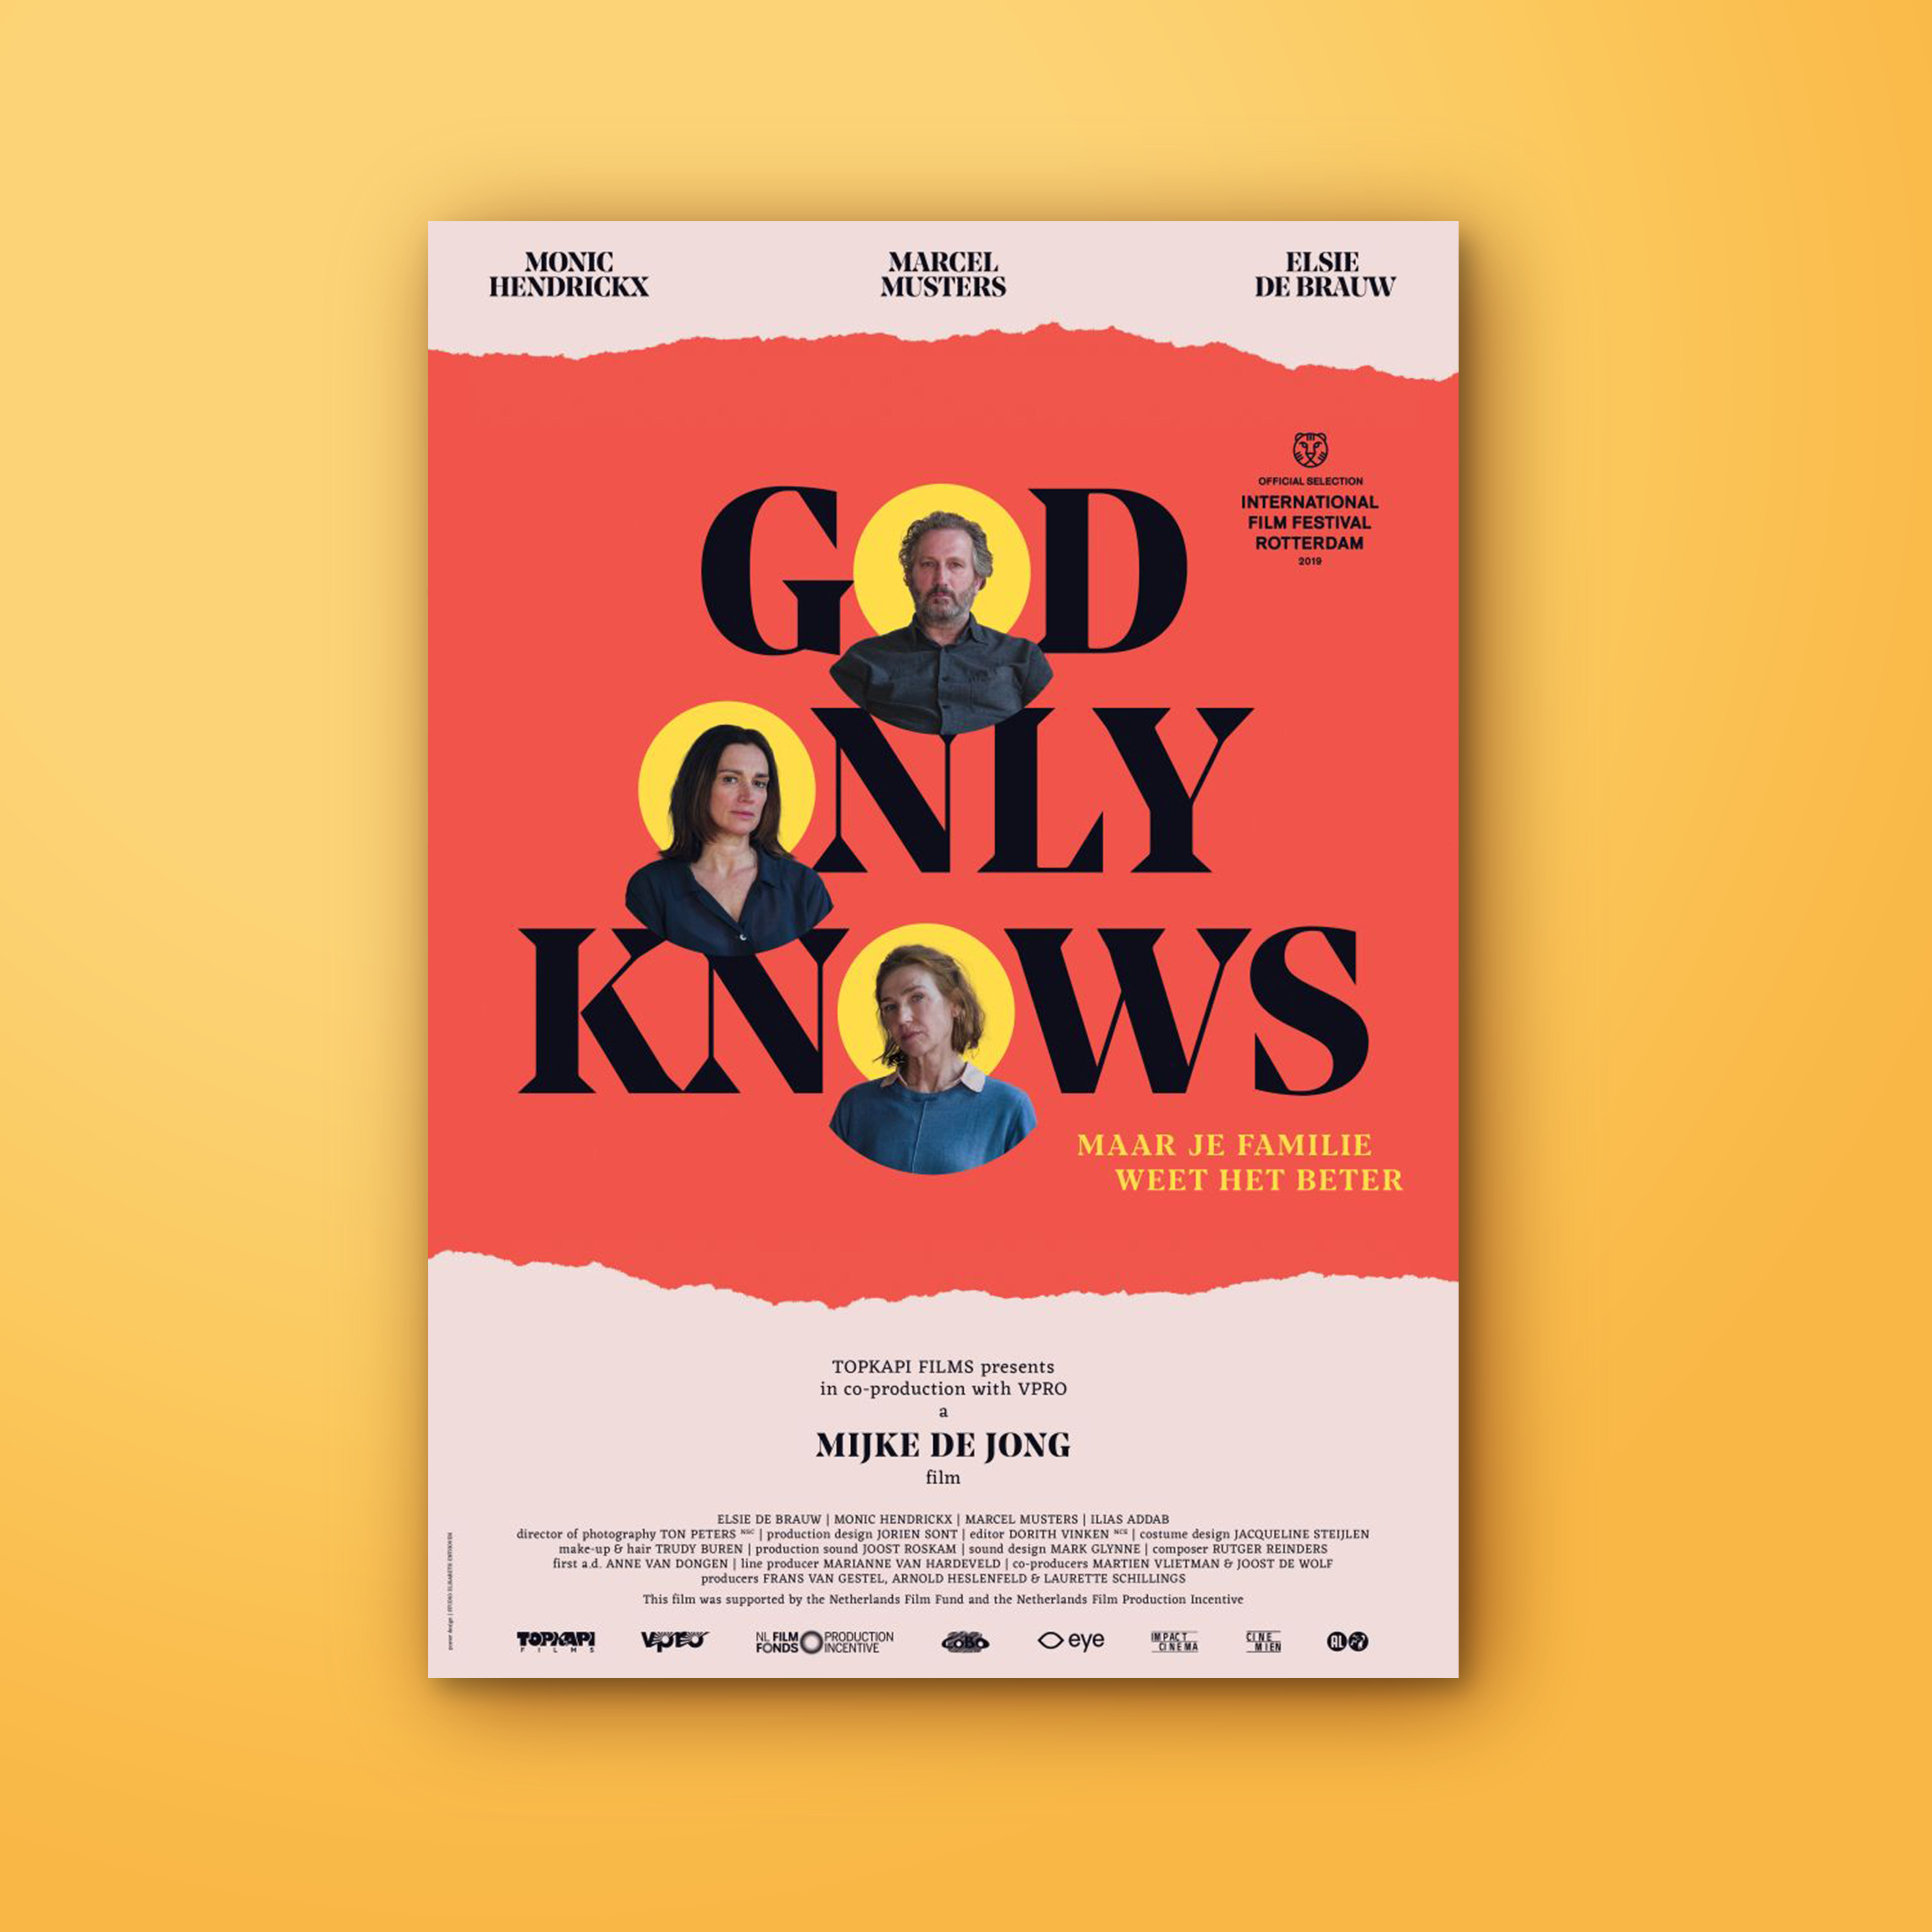 Graphic design movie poster god only knows